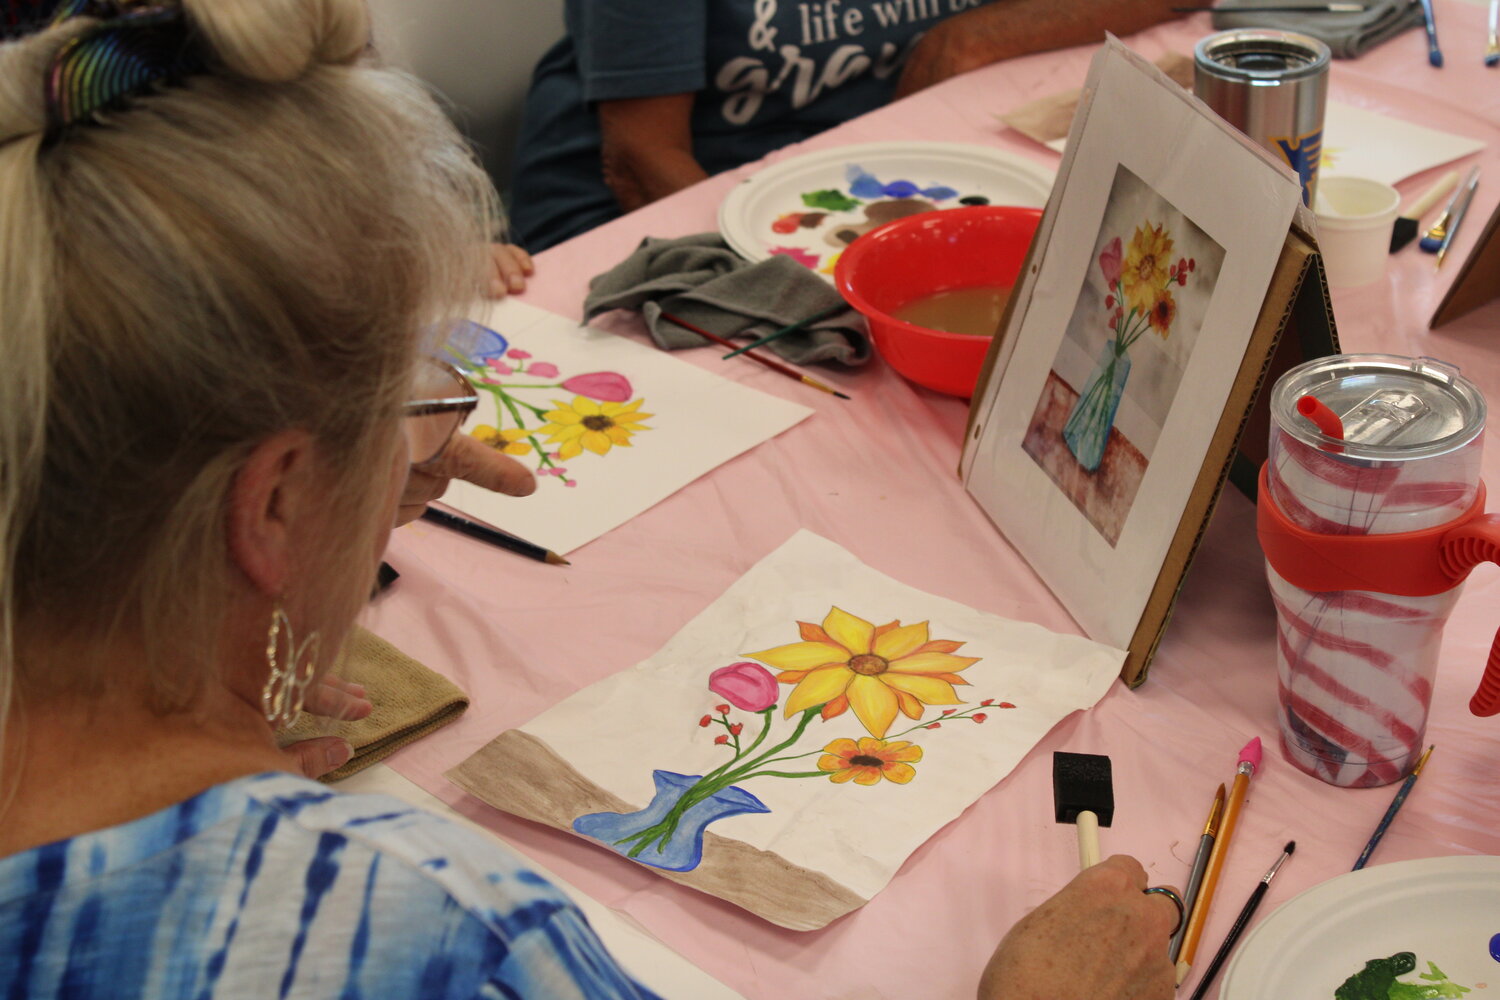 Sherry Smart works on her watercolor painting while using the original image as a guide.